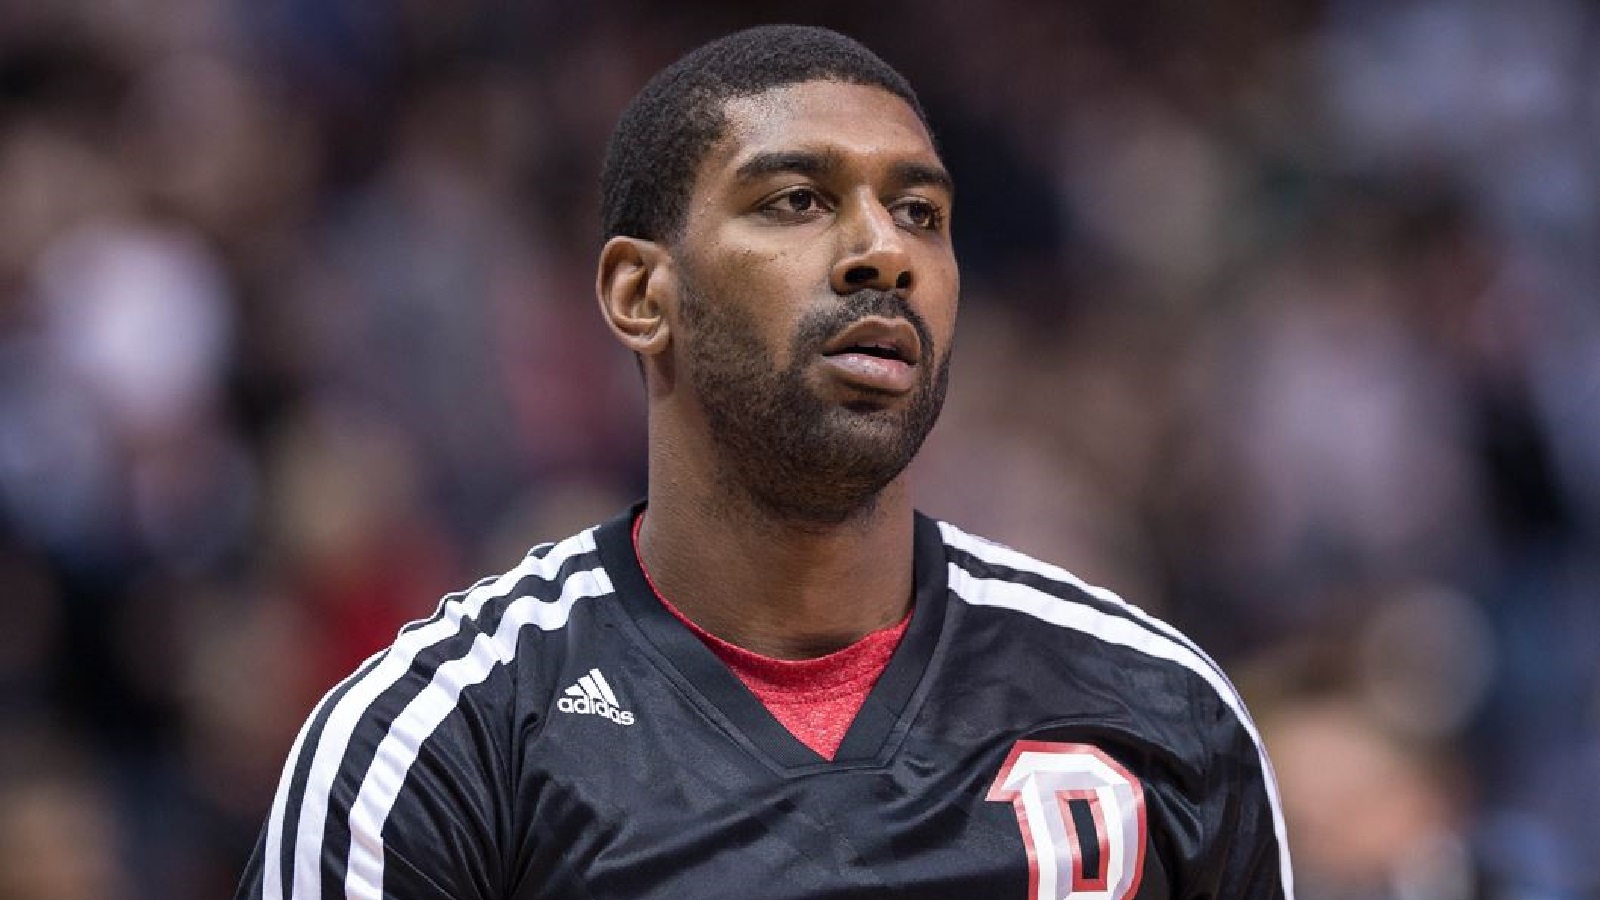 Former NBA guard OJ Mayo signs with unexpected team